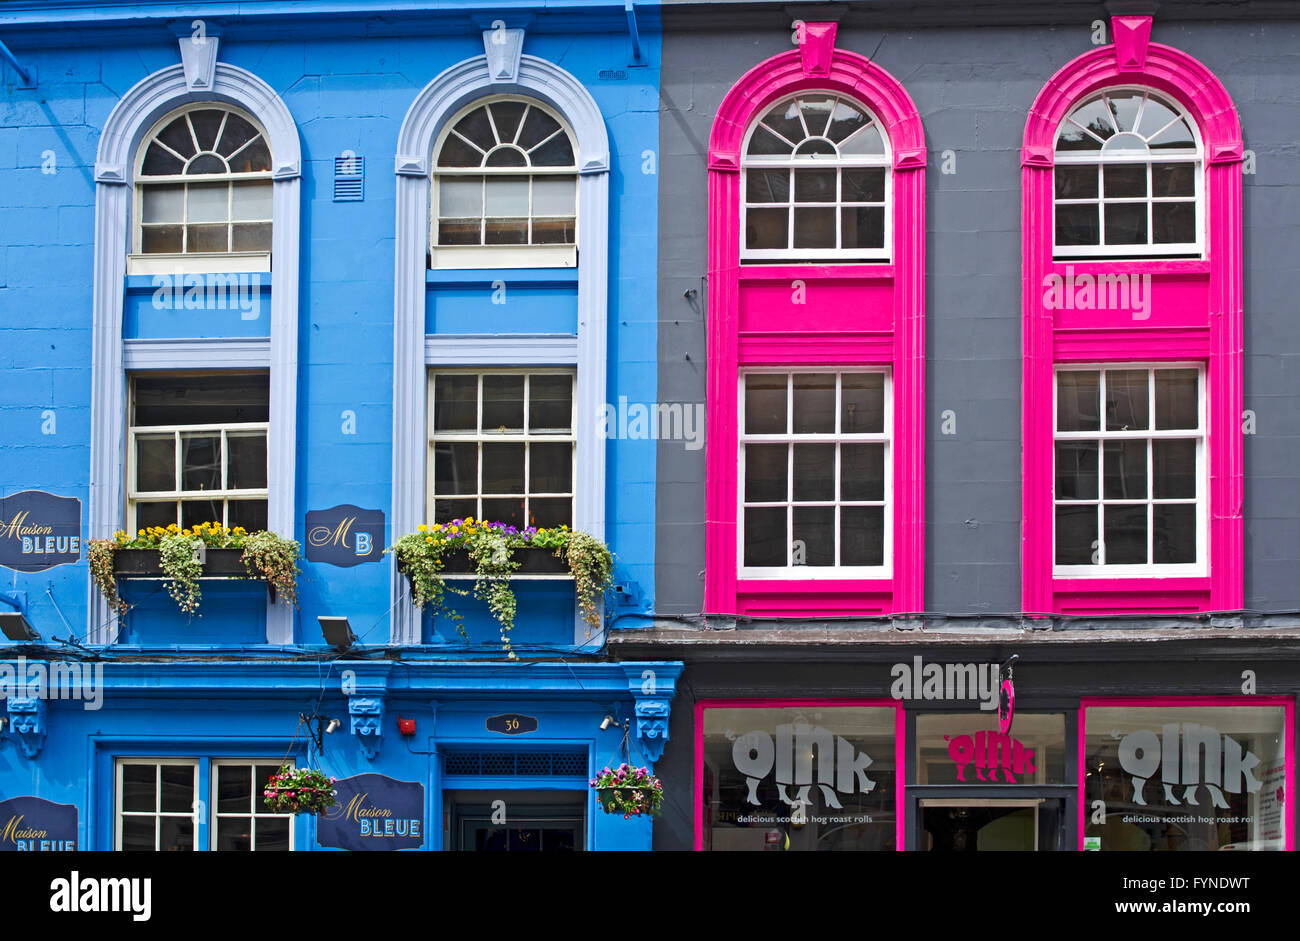 Close-up of brightly painted facades of two store fronts on Victoria Street, Edinburgh Old Town, Scotland UK Stock Photo